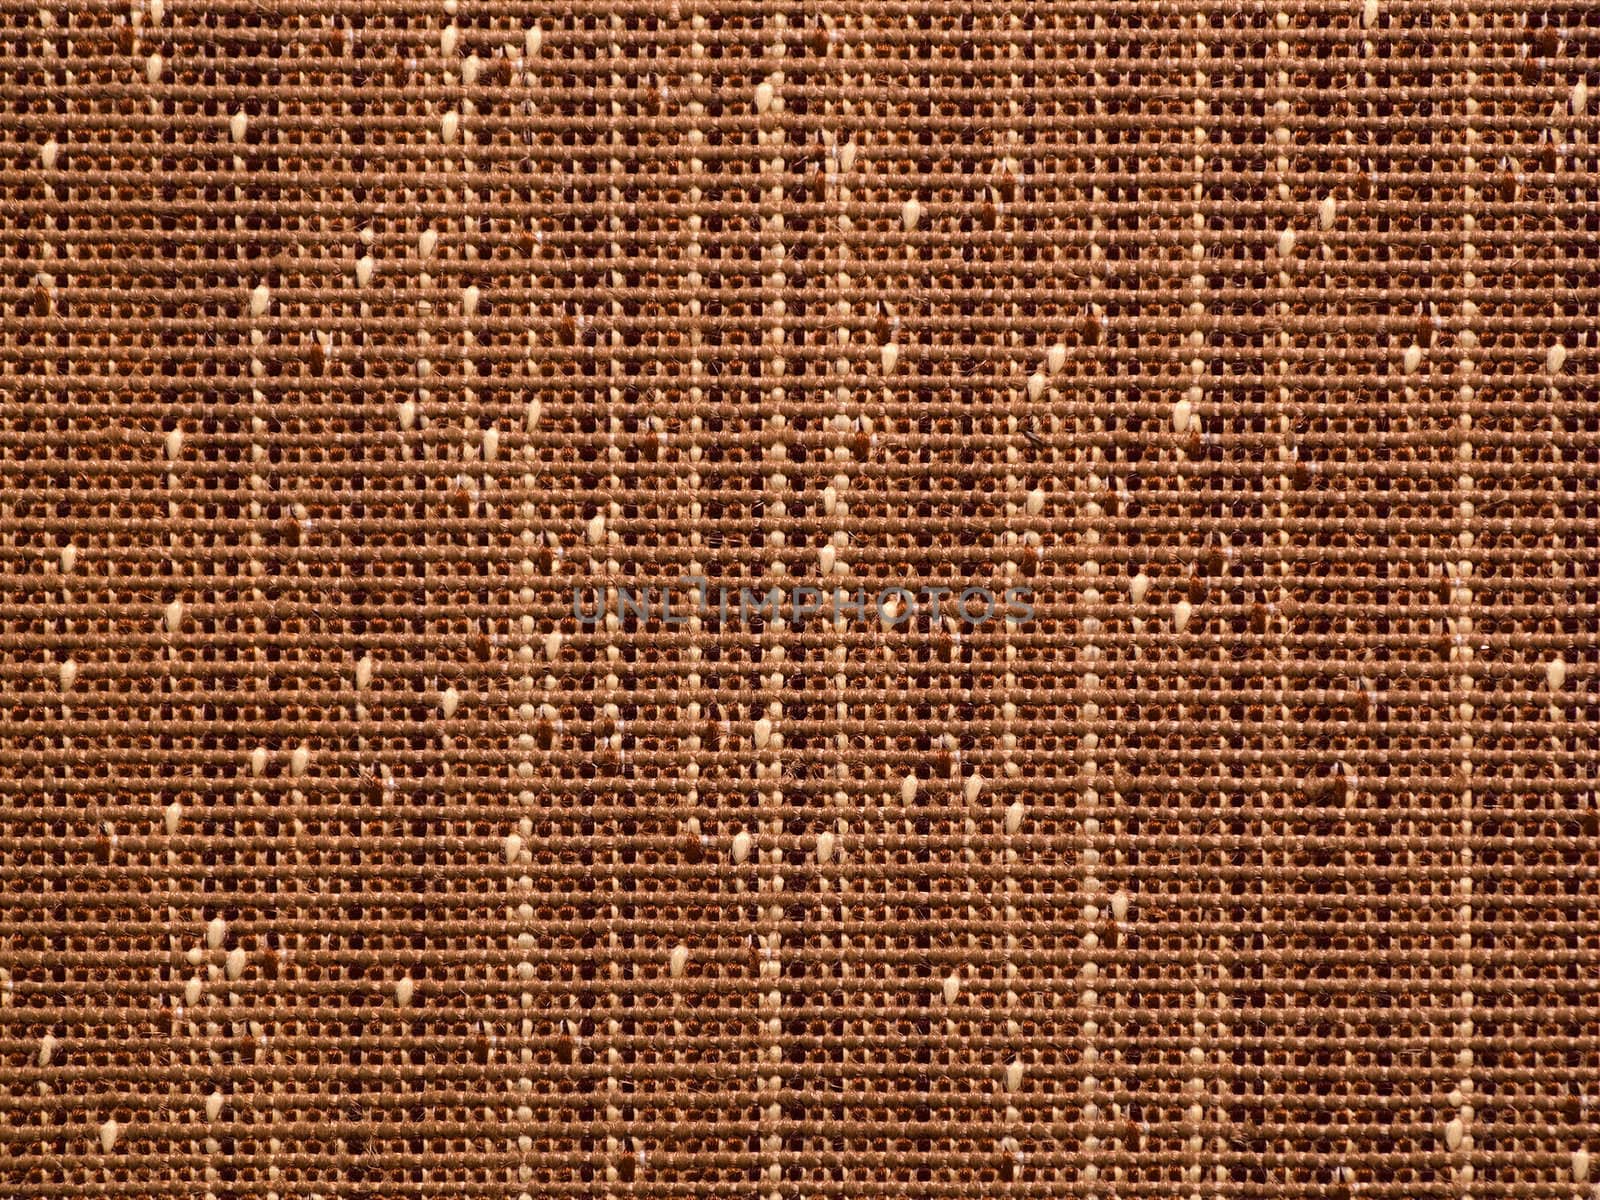 Textile material woven pattern textured background